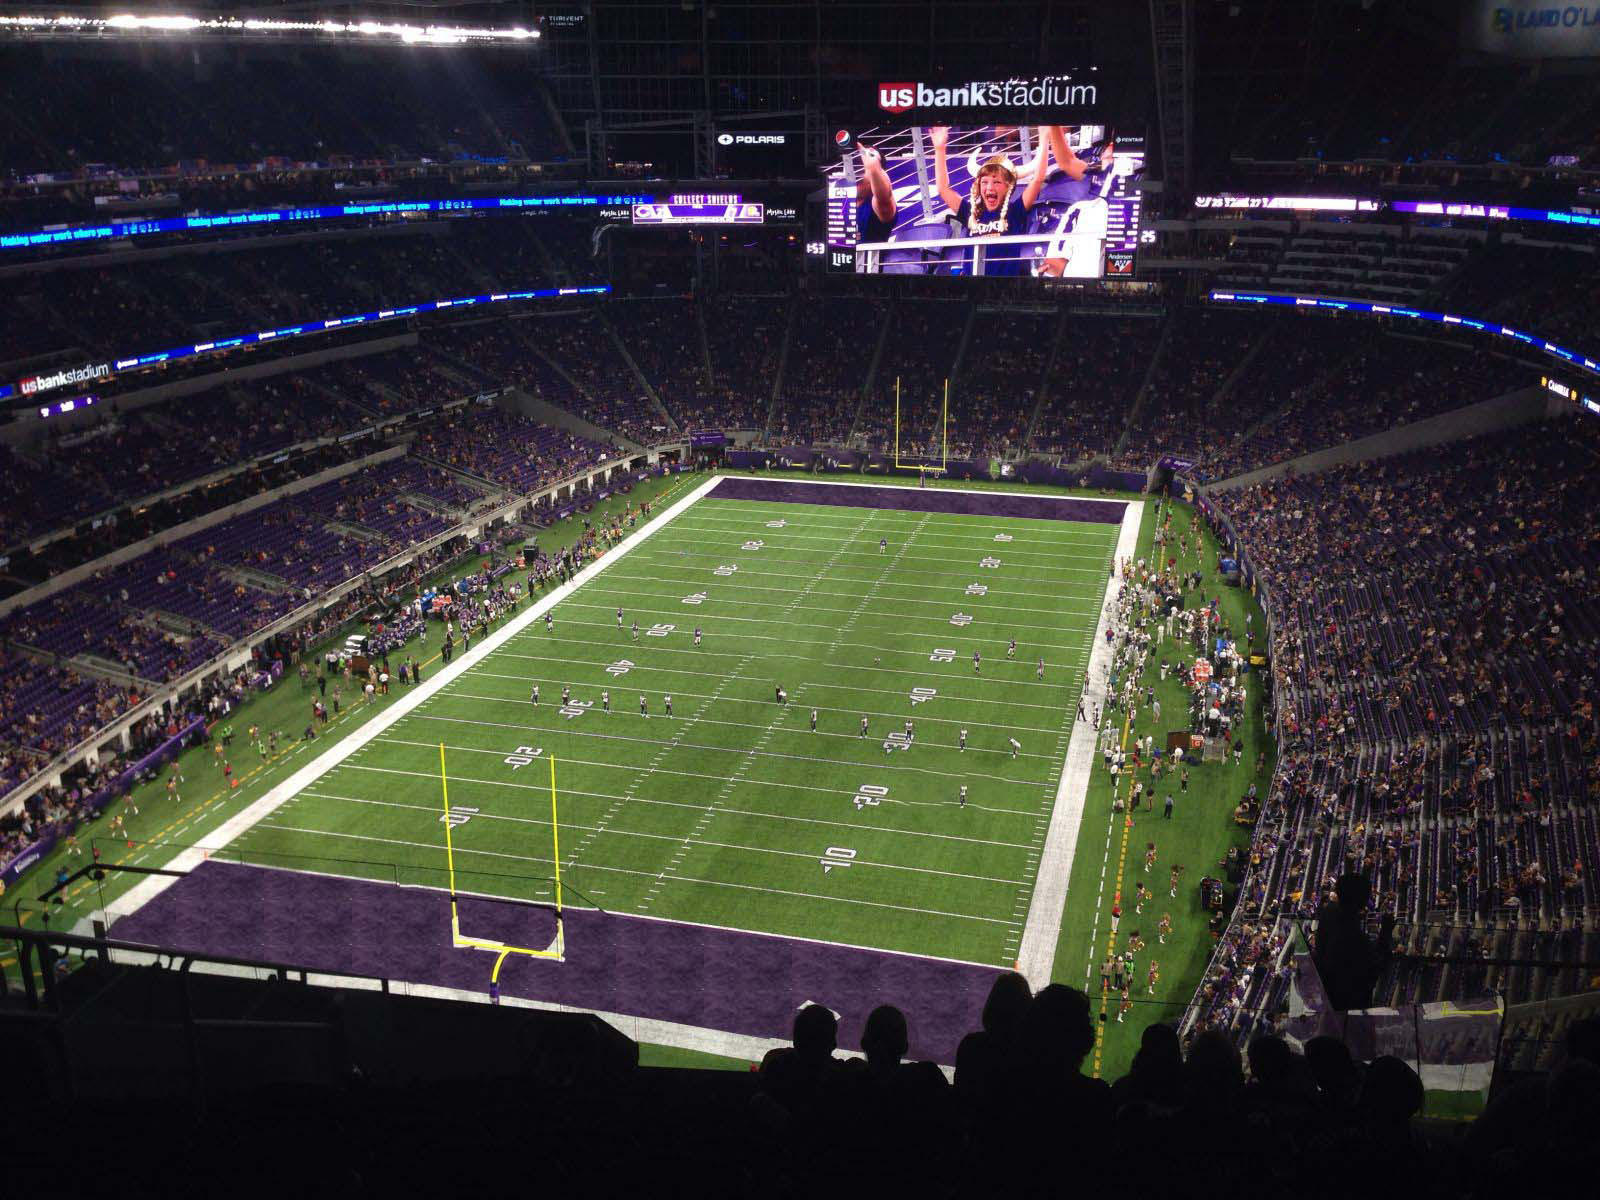 section 324, row 11 seat view  for football - u.s. bank stadium